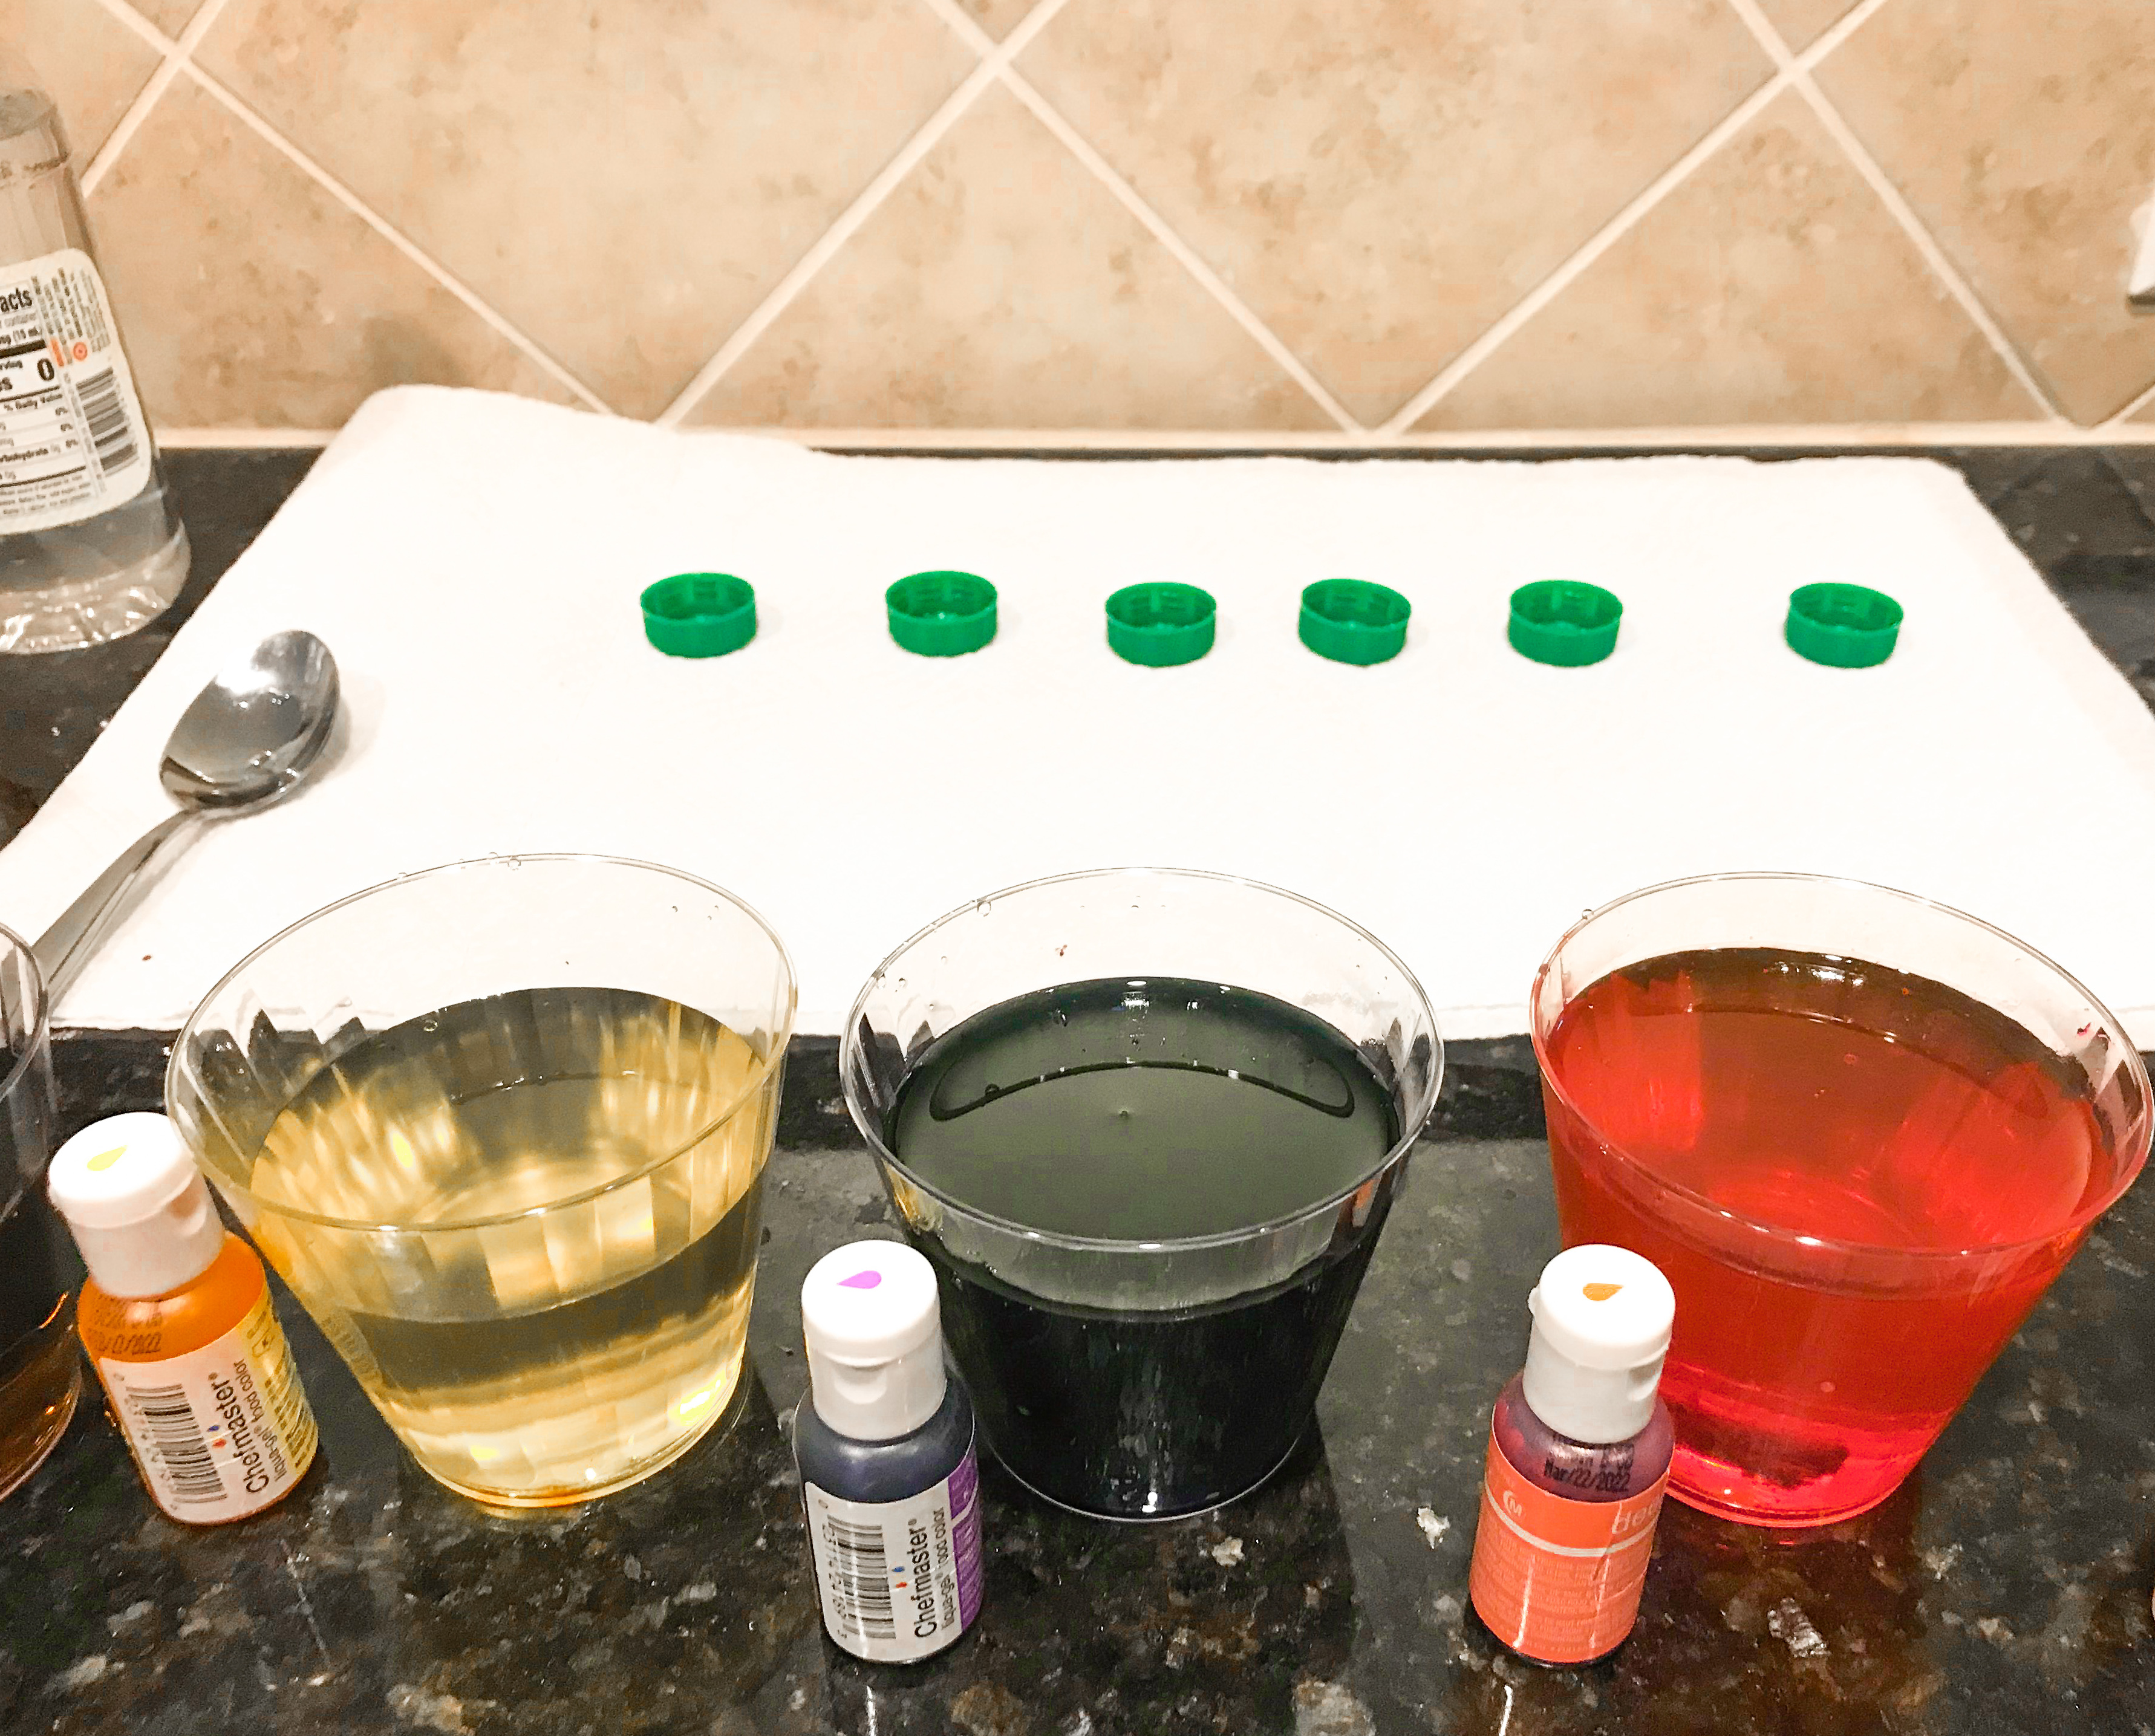 Glasses of Easter egg dye, food coloring, and bottle caps on a paper towel. 